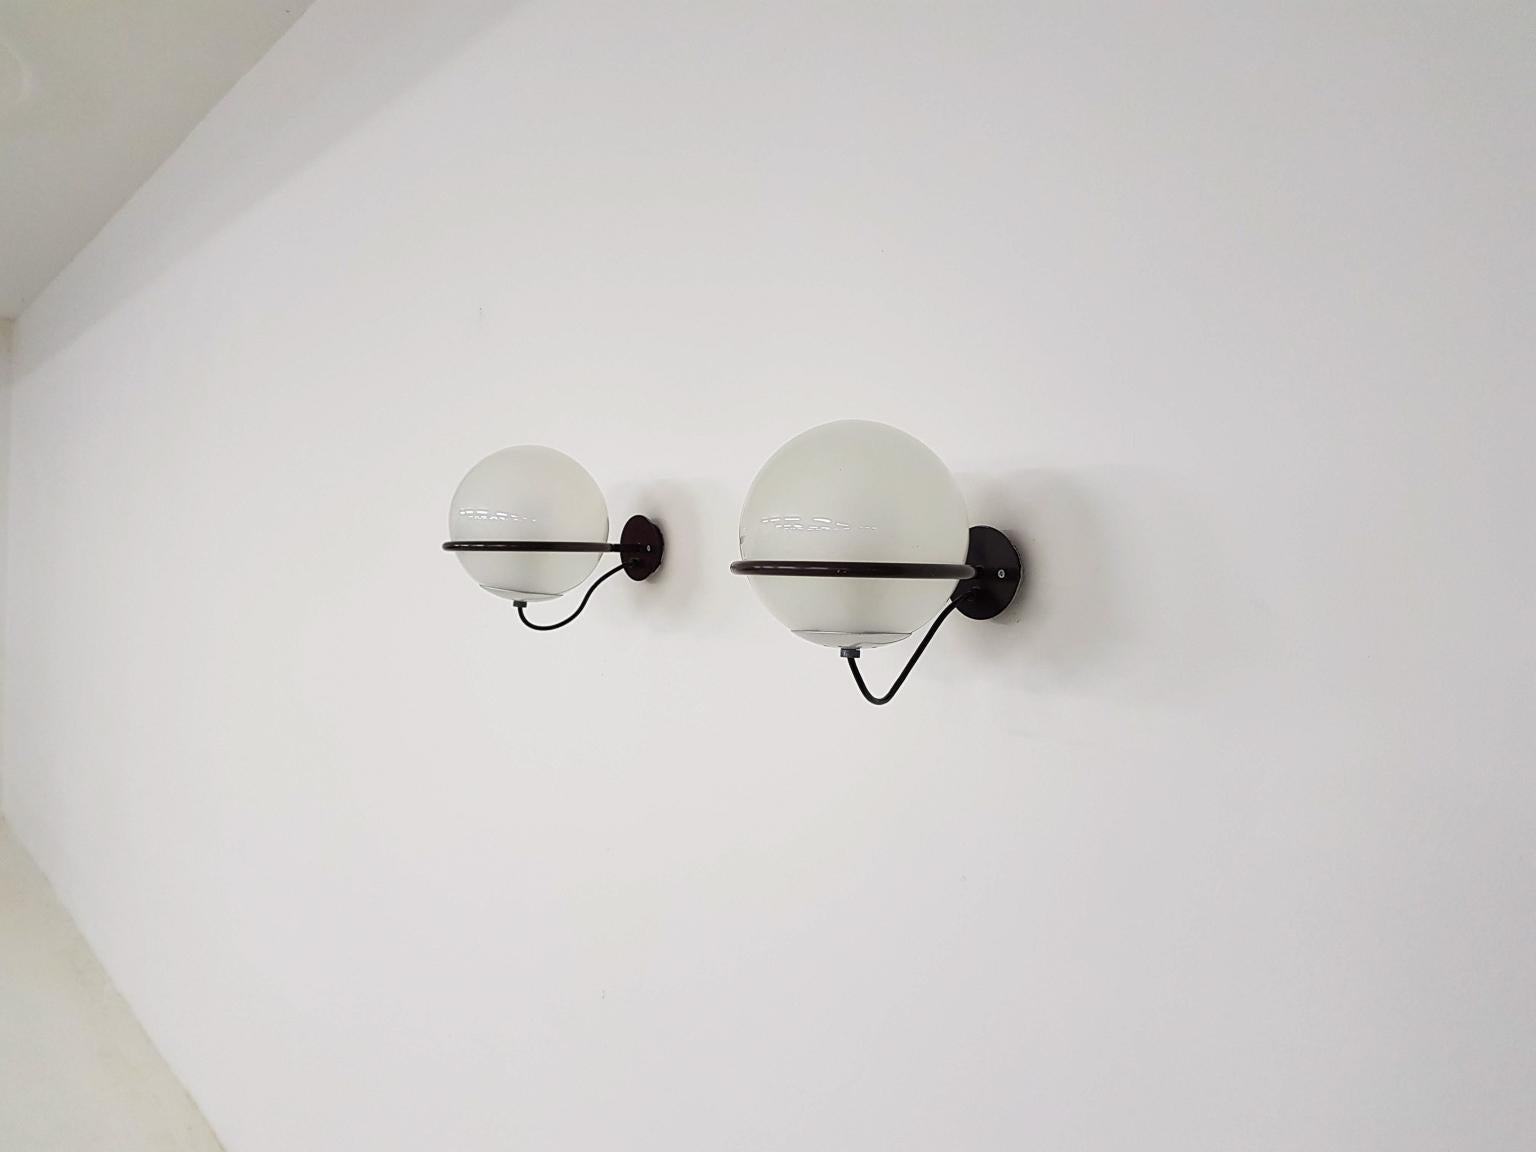 Frosted Pair of Globe Wall Lights Model 238/1 by Gino Sarfatti for Arteluce, Italy, 1959